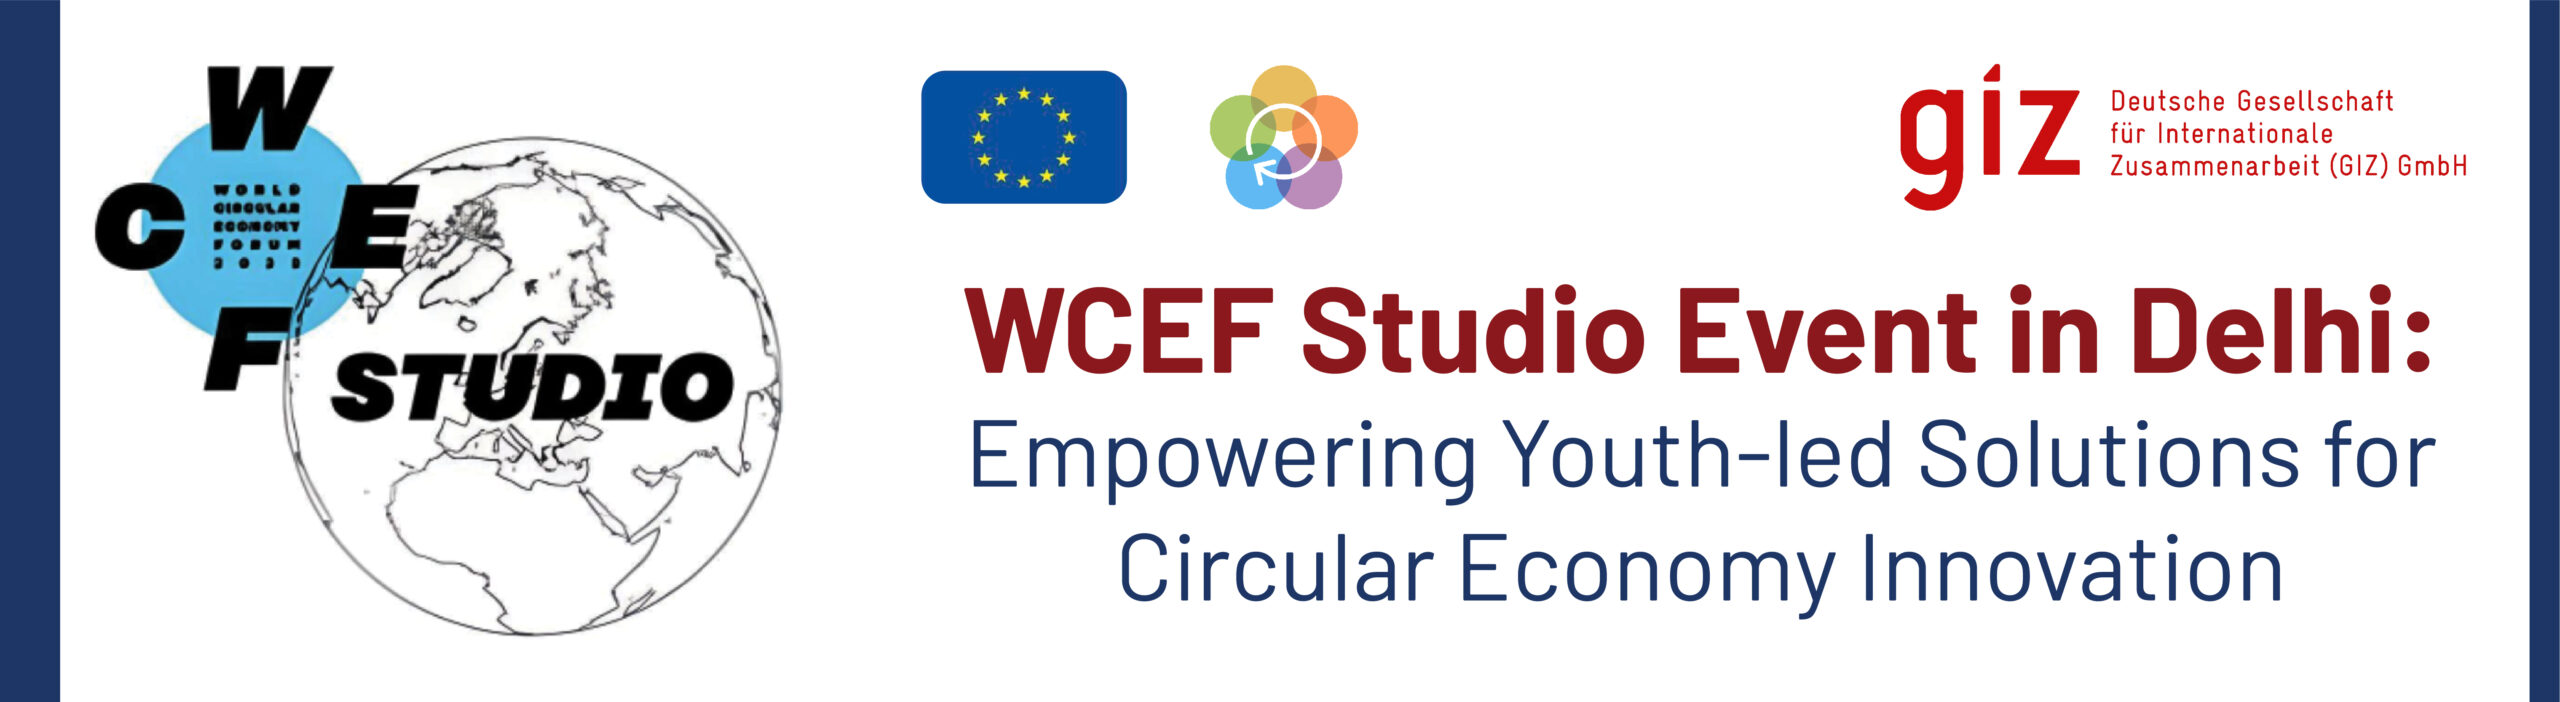 Empowering Youth-led Solutions for Circular Economy Innovation